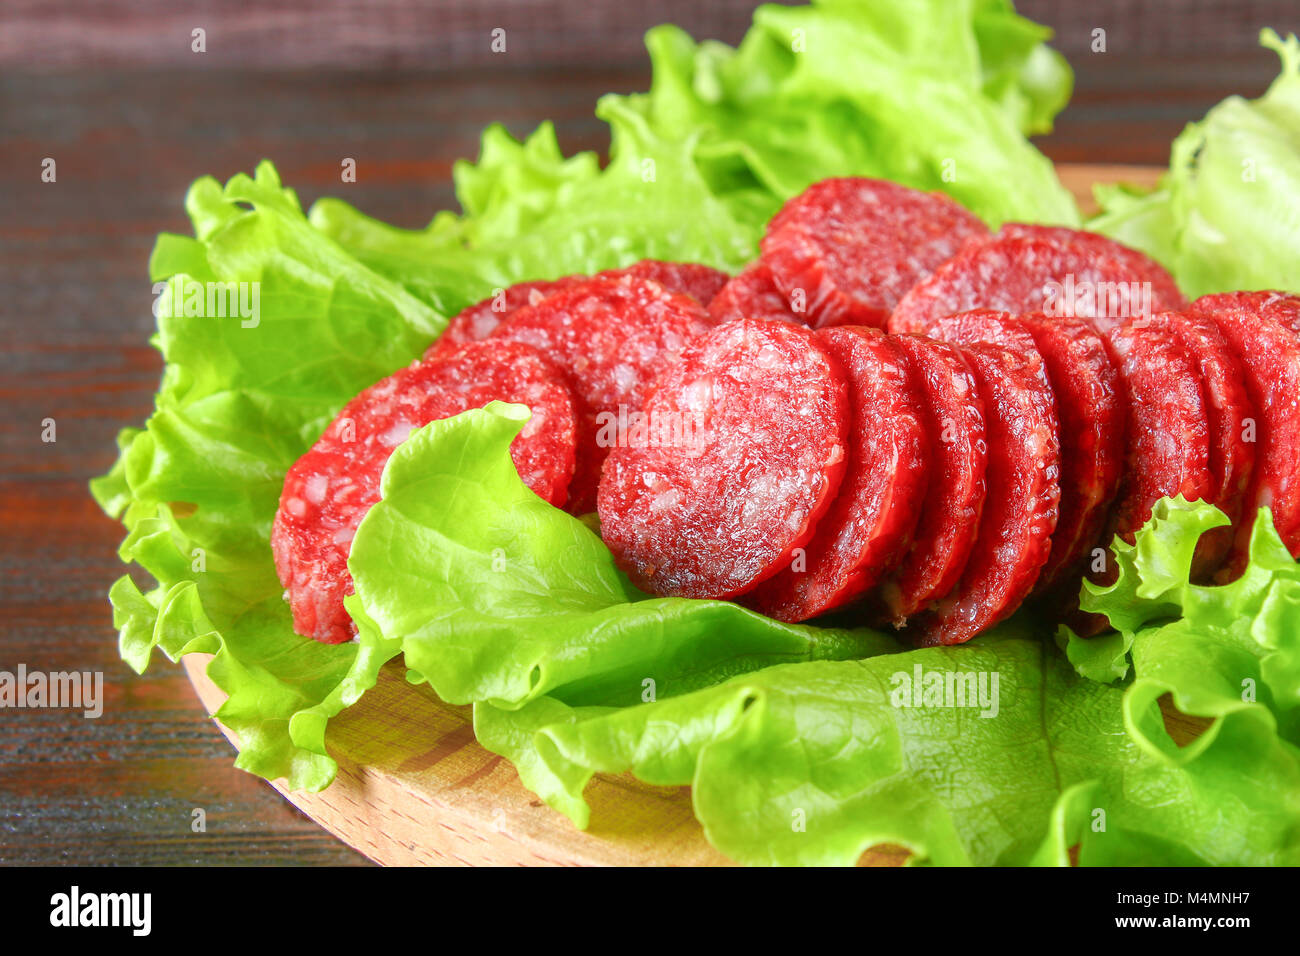 Smoked sausage, salami chopped in slices on a salad on a wooden circular cutting board on a brown table Stock Photo